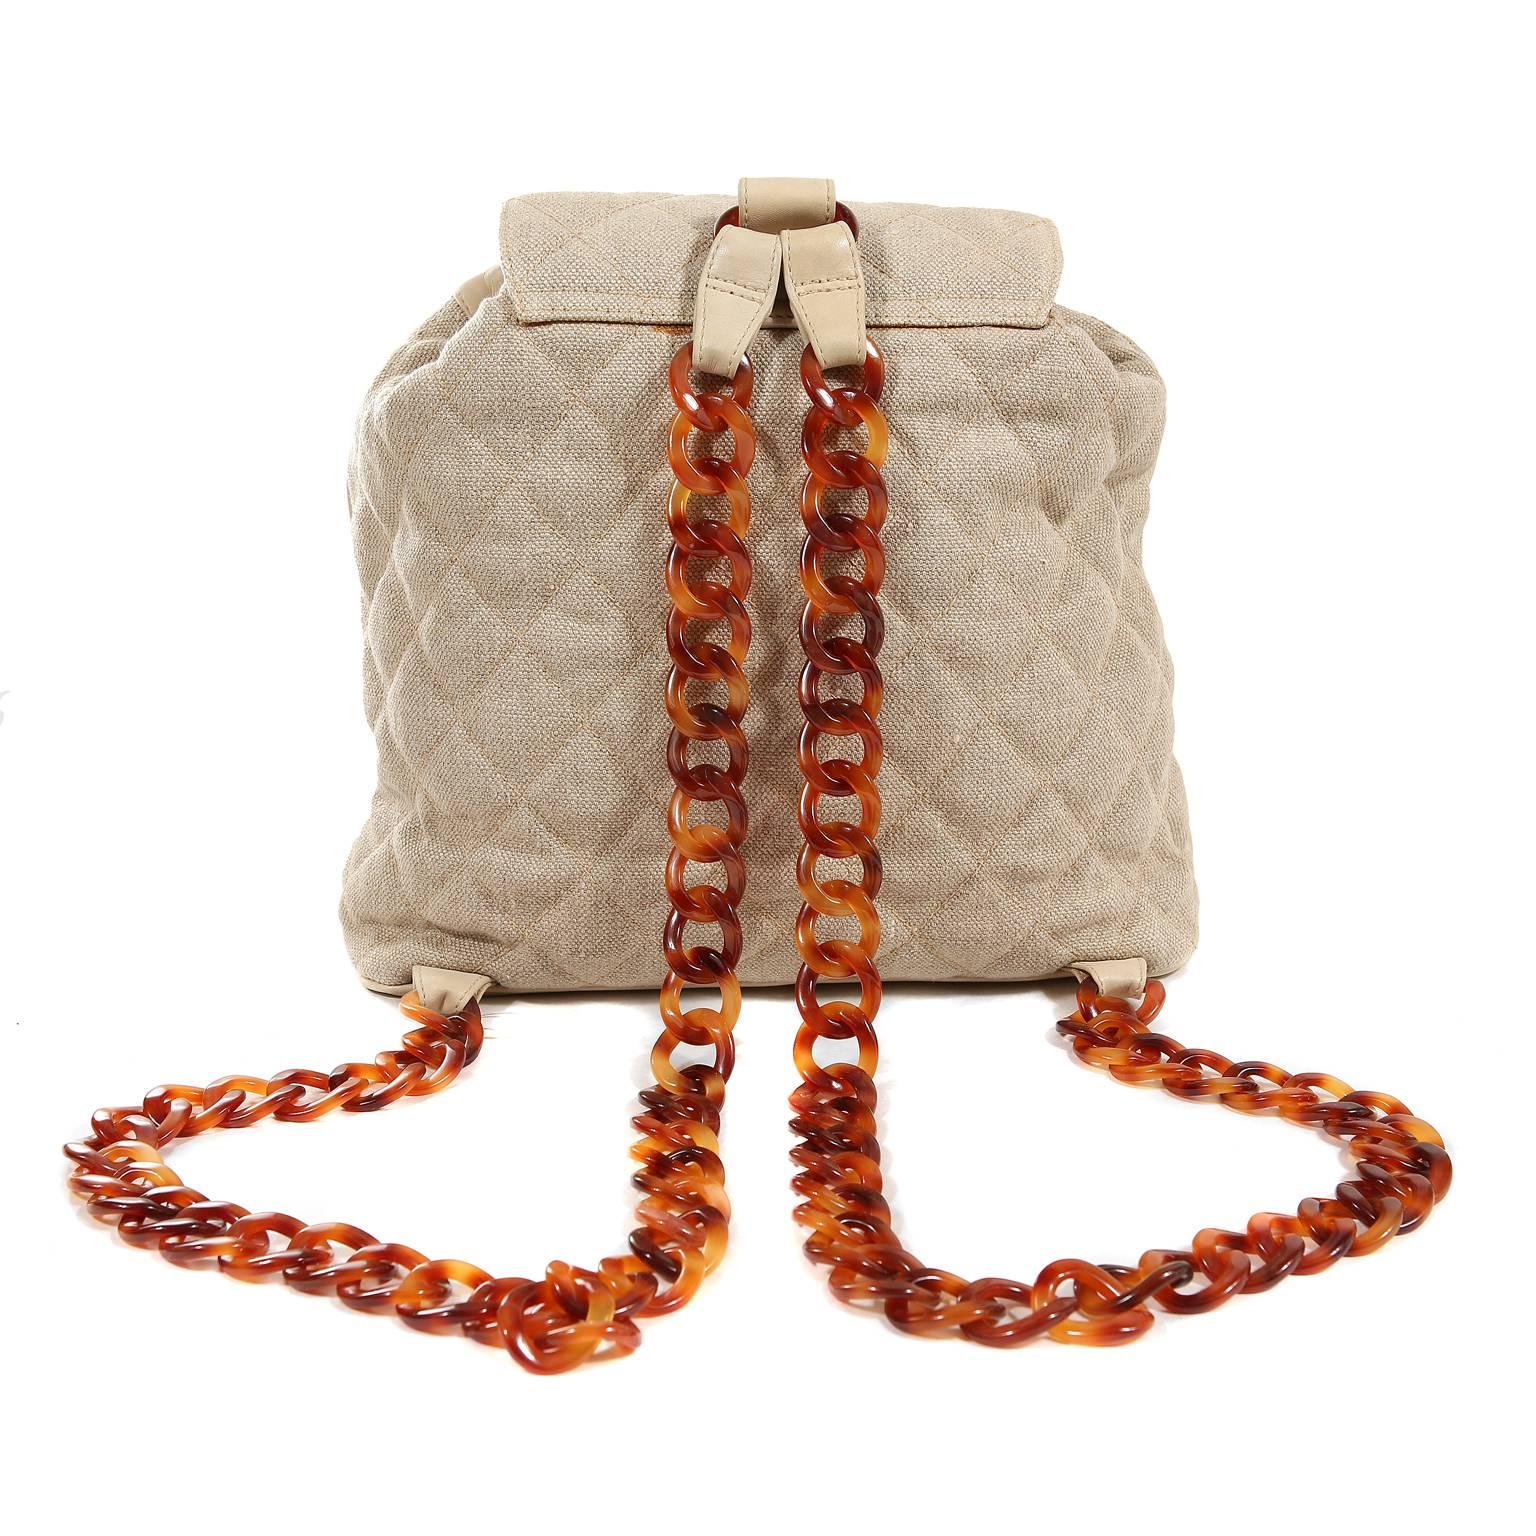 Chanel Quilted Linen Backpack- Excellent Plus condition
 A beautiful piece with tortoise resin accents, it is certain to be a favorite in any collection. 
Flax linen fabric is quilted in signature Chanel diamond pattern.  Large front pocket and top